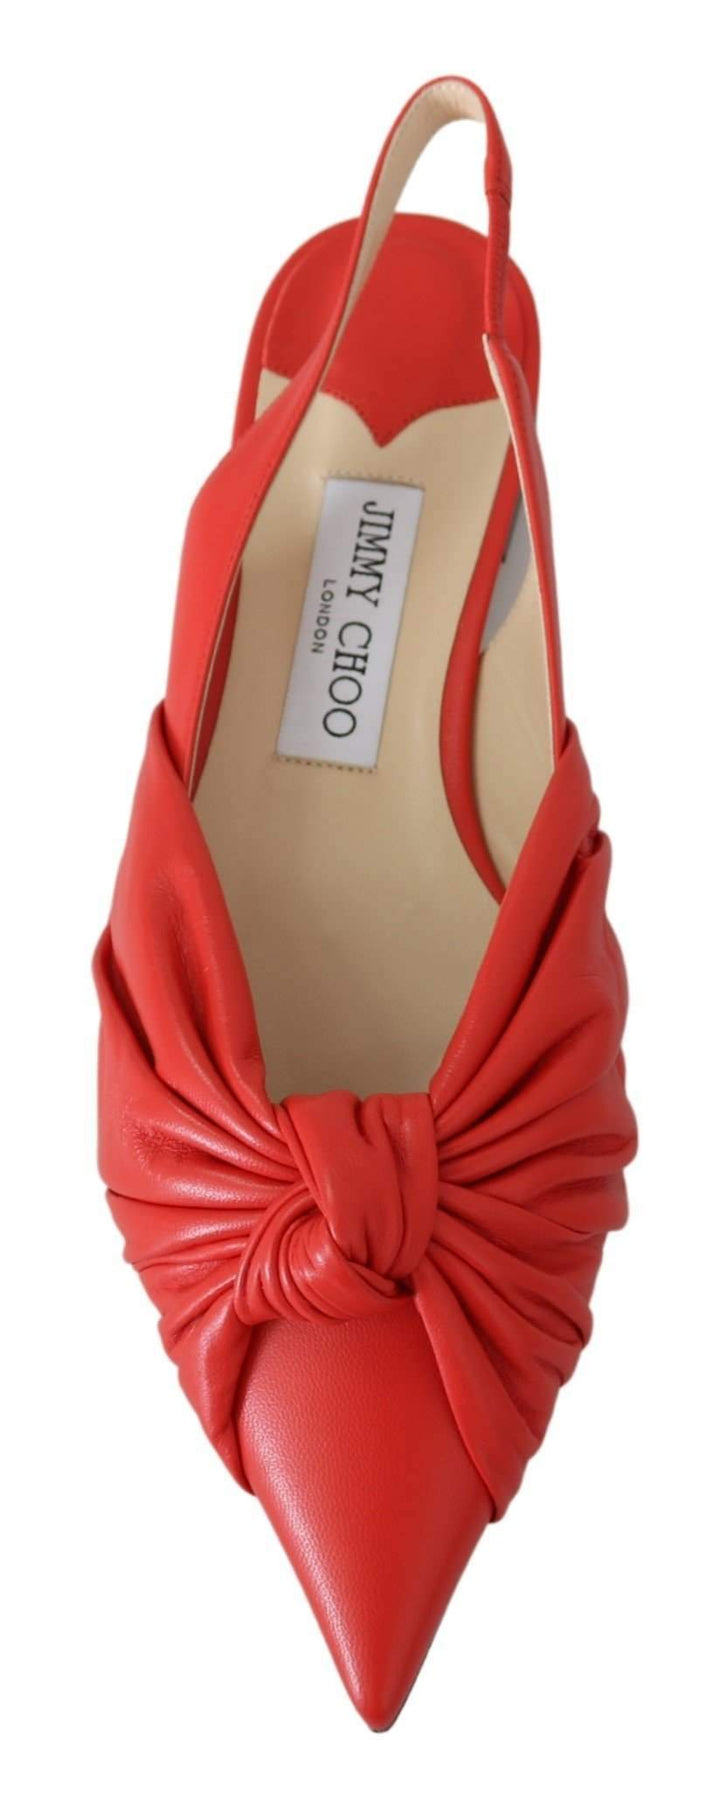 Annabell Flat Nap Chilli Leather Flat Shoes #women, EU36.5/US6.5, EU36/US6, EU38.5/US8.5, EU38/US8, EU39/US9, feed-agegroup-adult, feed-color-red, feed-gender-female, feed-size-US6, feed-size-US6.5, feed-size-US8, feed-size-US8.5, feed-size-US9, Flat Shoes - Women - Shoes, Gender_Women, Jimmy Choo, Red, Shoes - New Arrivals at SEYMAYKA